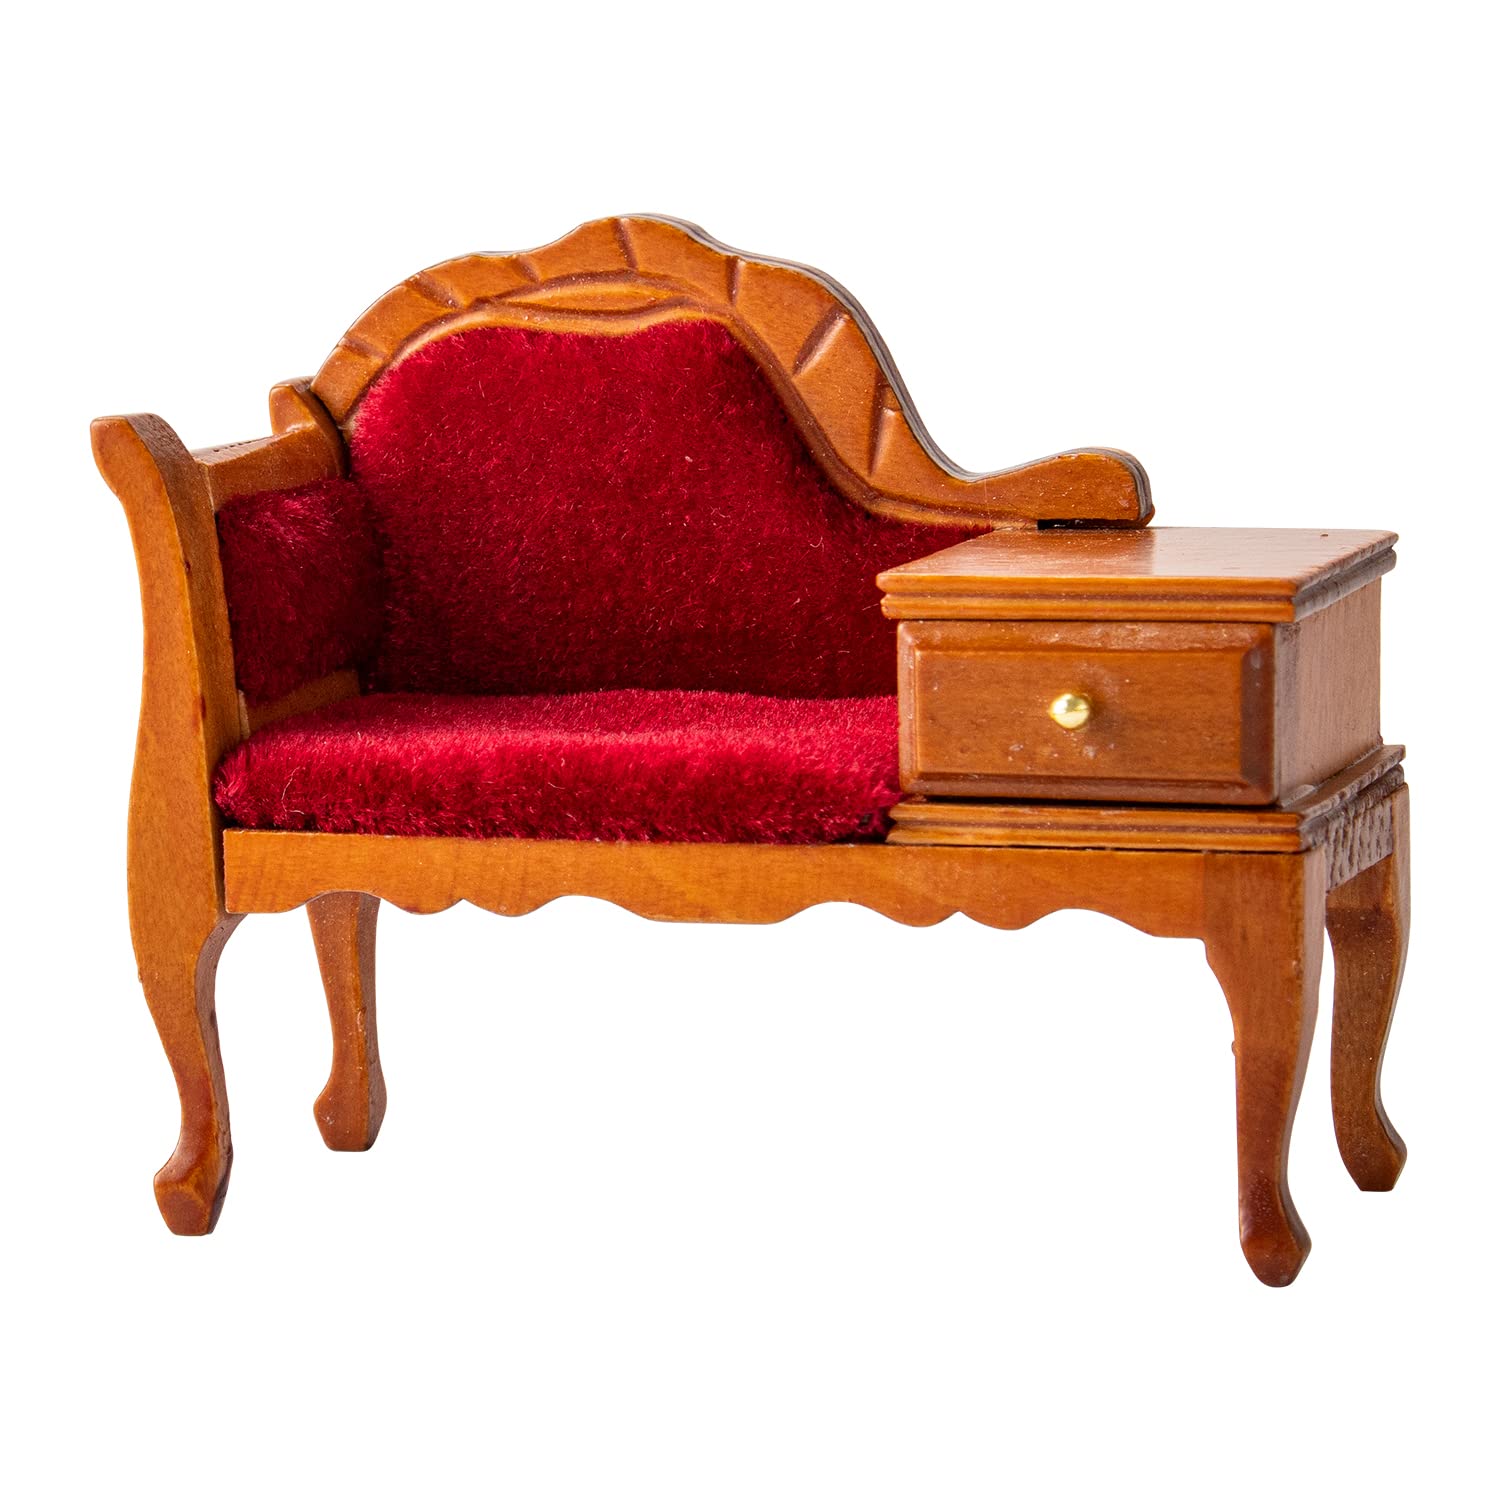 Hiawbon 1:12 Miniature Vintage Red Wooden Sofa Armchair with Drawer Cabinet Mini House Furniture Decoration